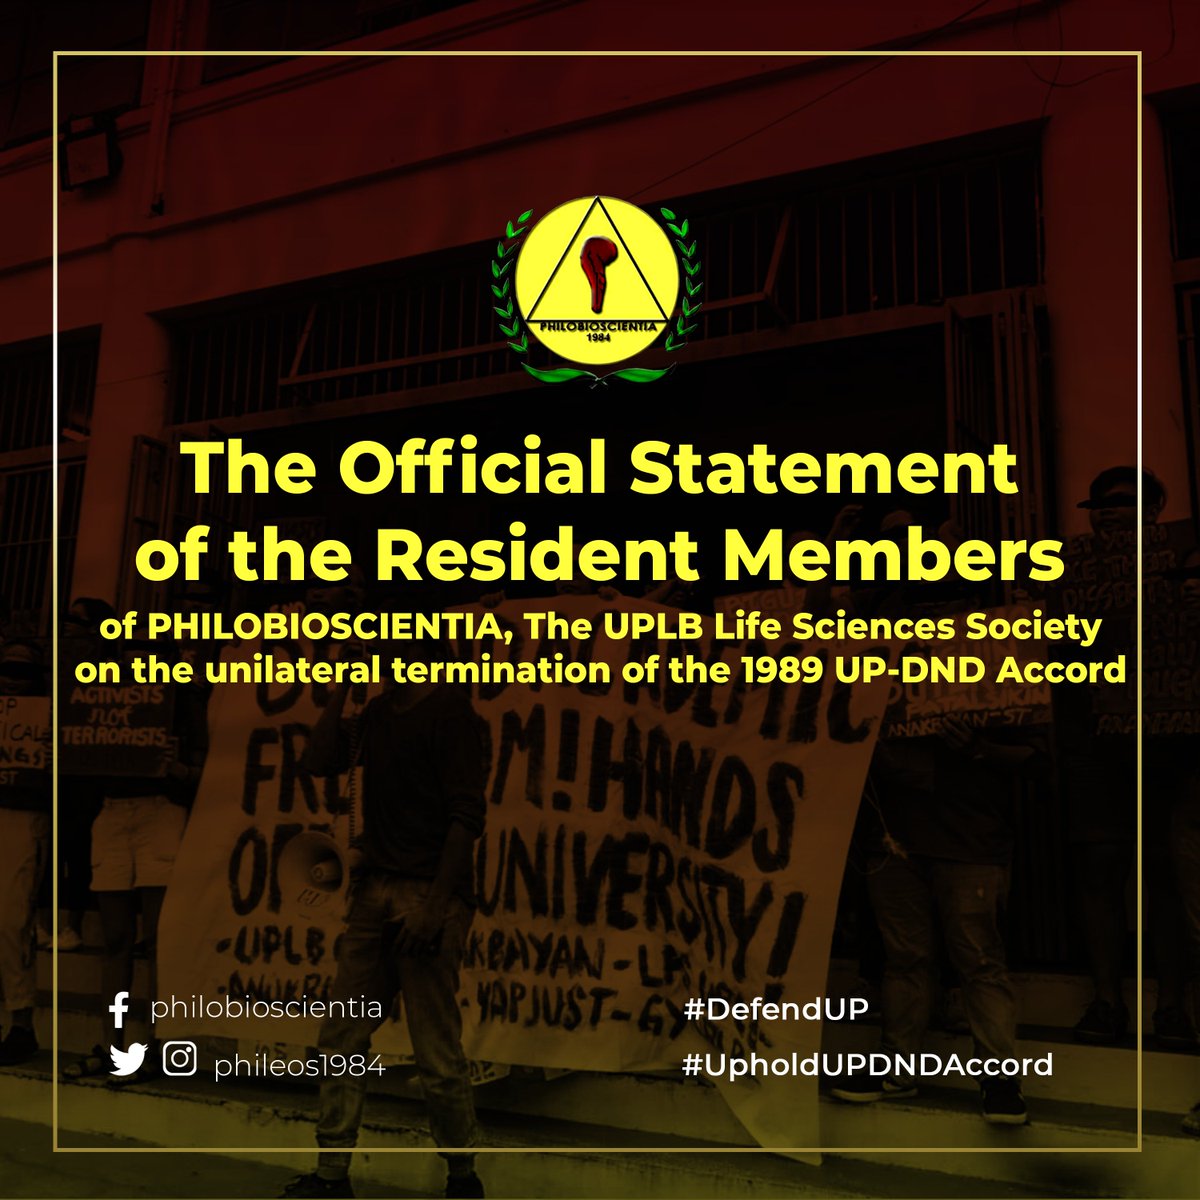 The Official Statement of the Resident Members of PHILOBIOSCIENTIA, The UPLB Life Sciences Society on the unilateral termination of the 1989 UP-DND Accord

#DefendUP
#UpholdUPDNDAccord